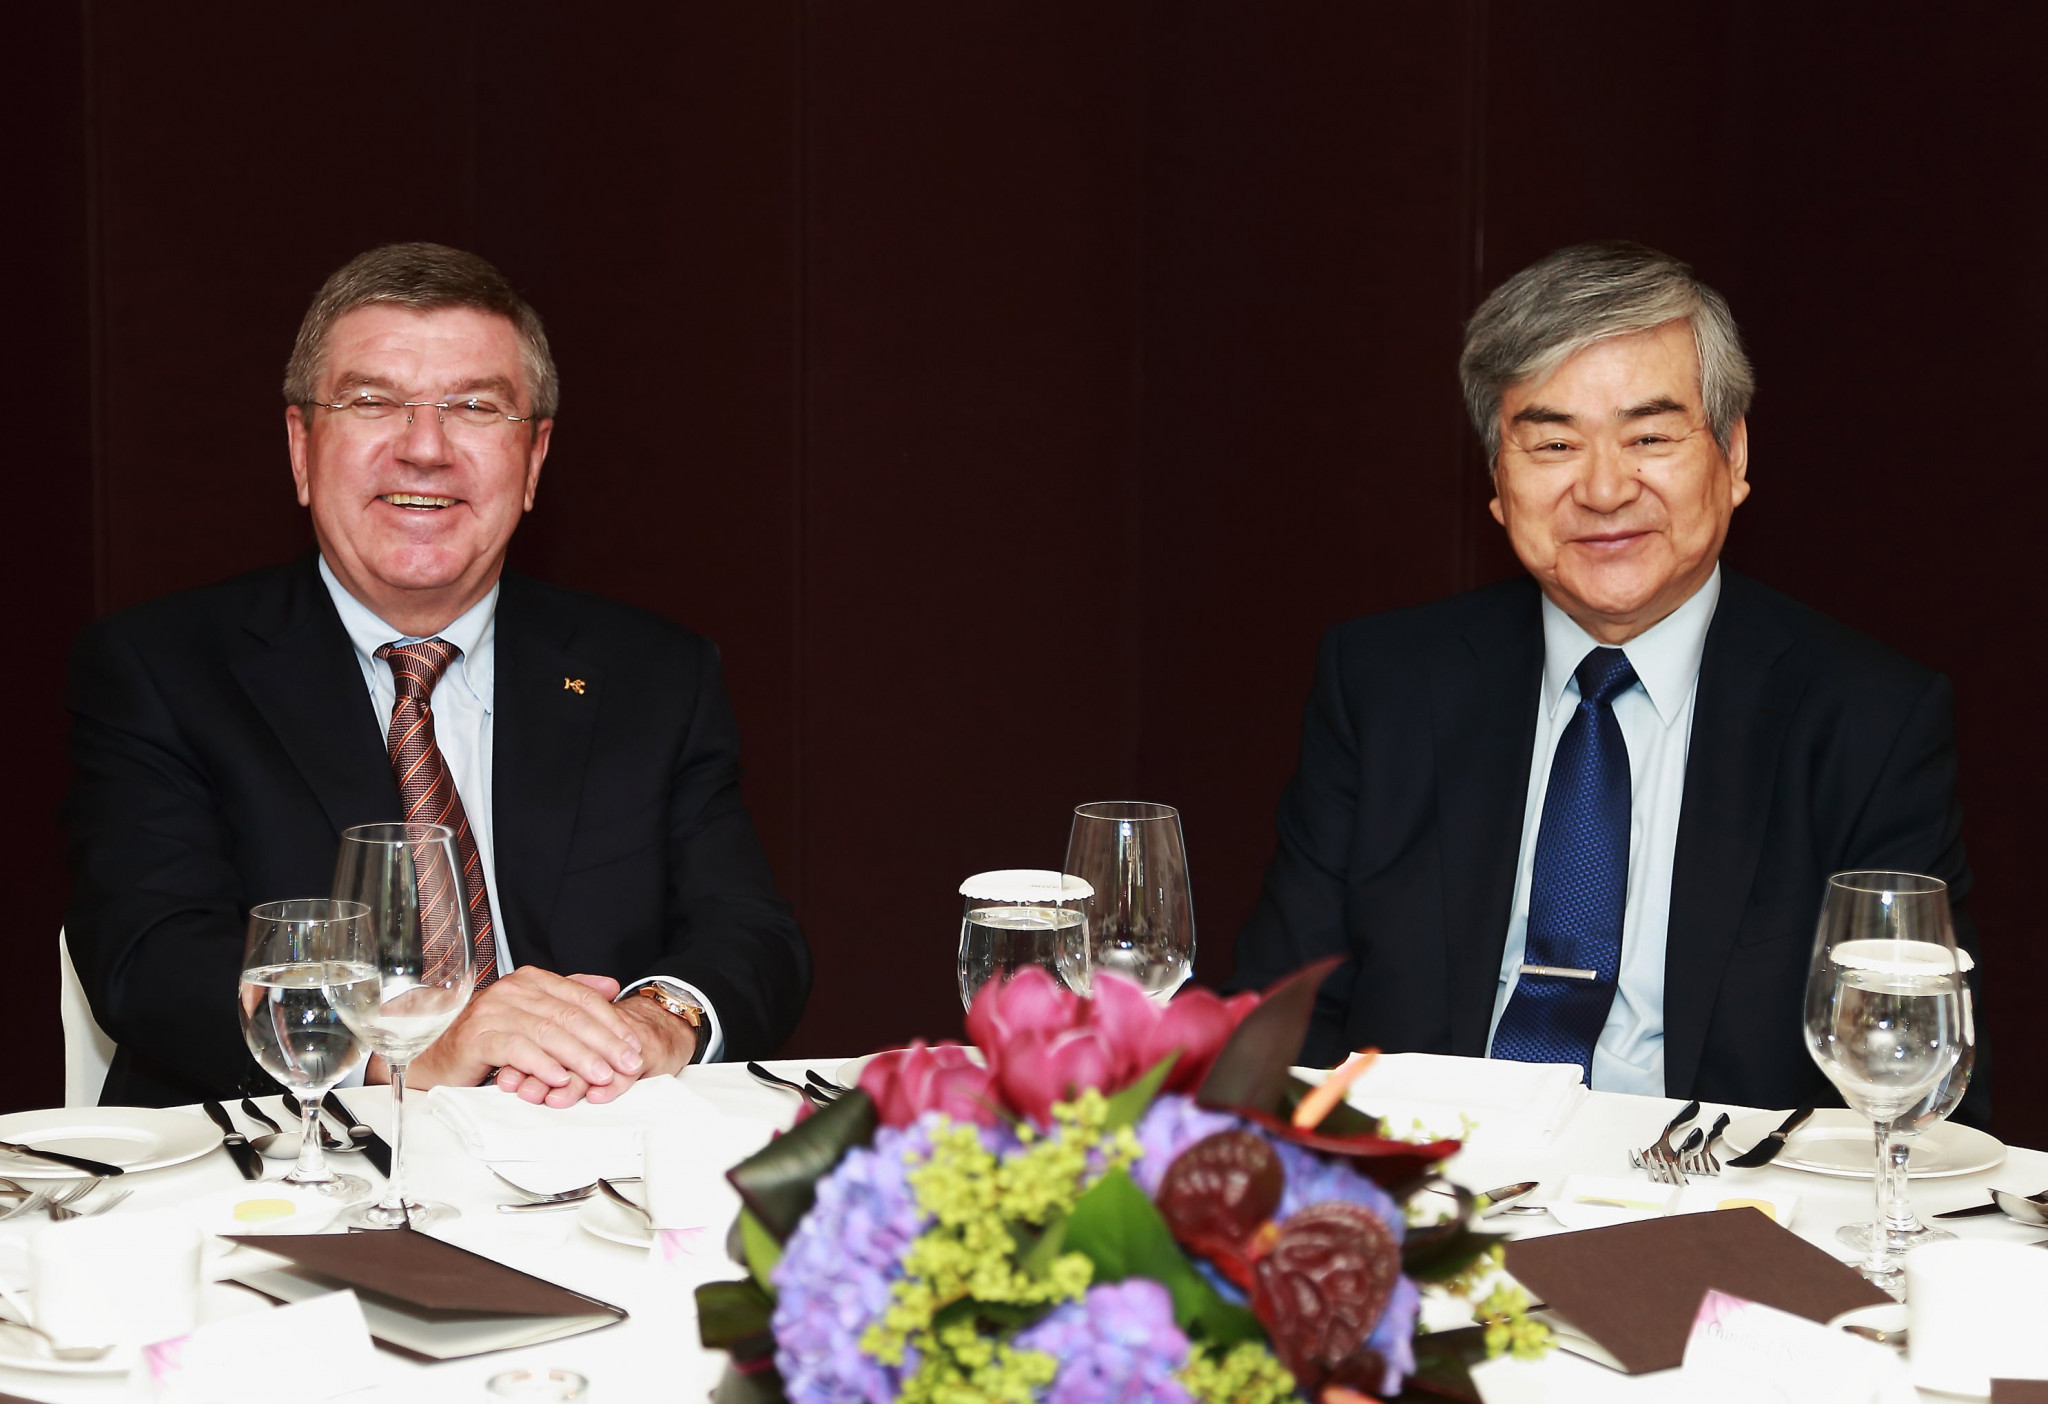 Yang Ho Cho,pictured with IOC President Thomas Bach, was credited with helping getting preparations for Pyeongchang 2018 back on track when he returned in 2014, only to be forced out again two years later ©Pyeongchang 2018 